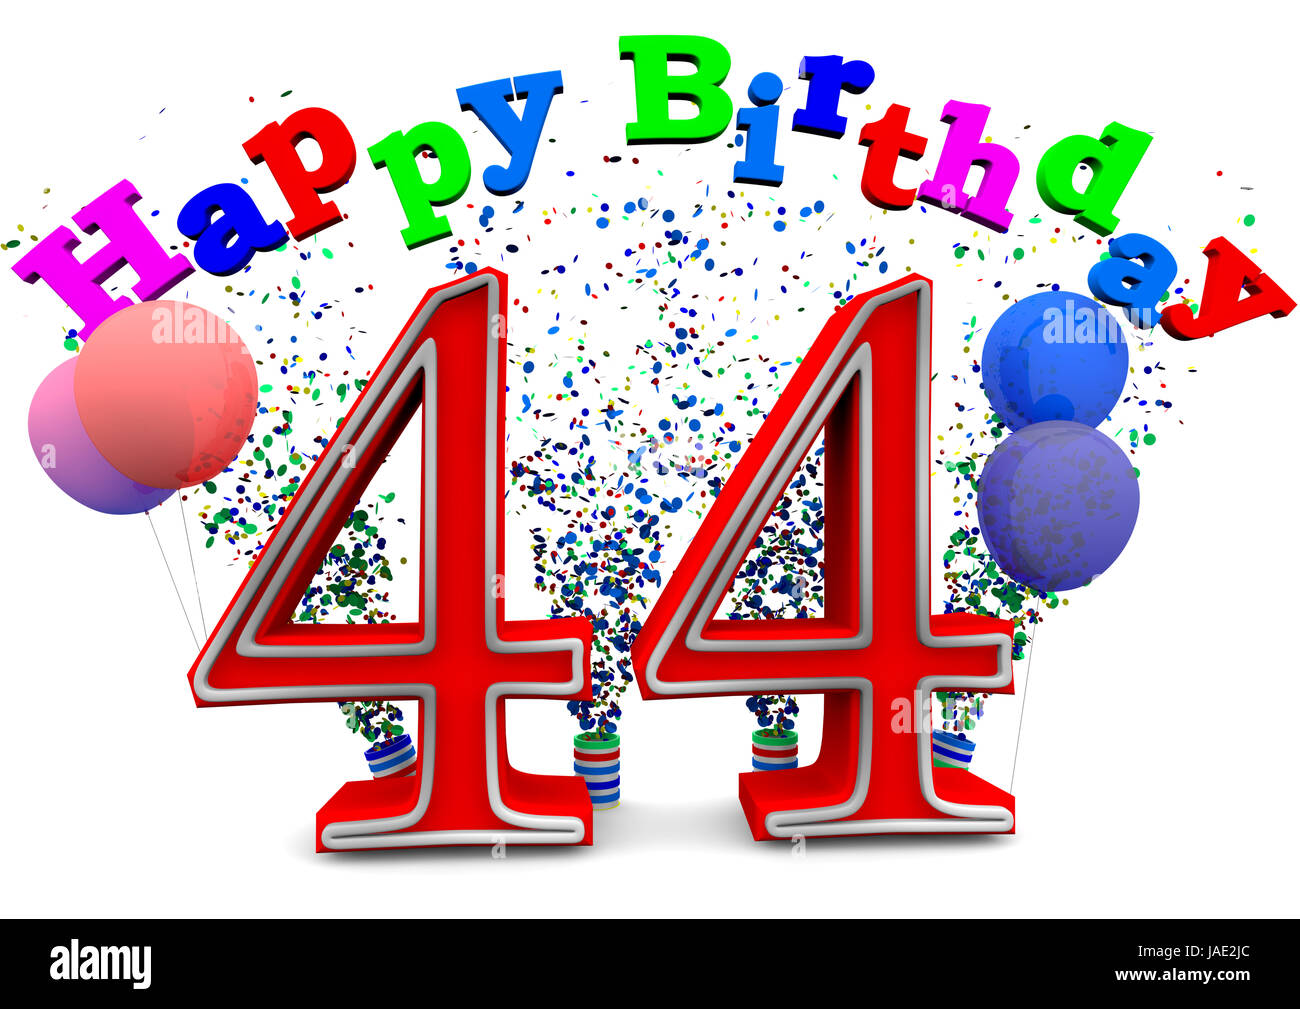 a-44-with-happy-birthday-and-balloons-stock-photo-alamy